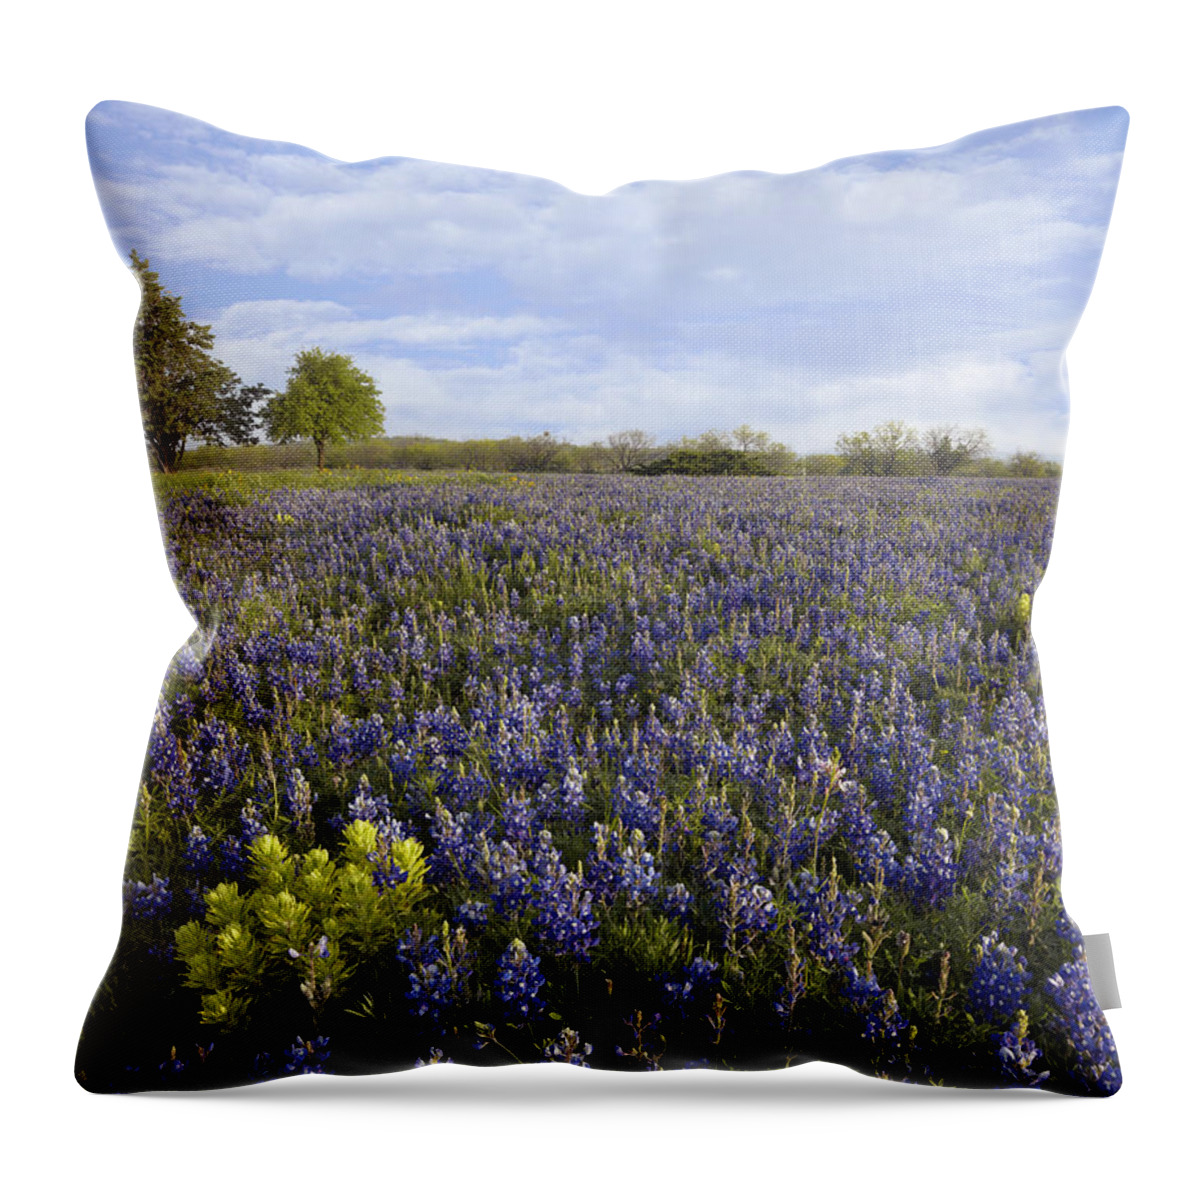 00442669 Throw Pillow featuring the photograph Bluebonnet And Lemon Paintbrush by Tim Fitzharris